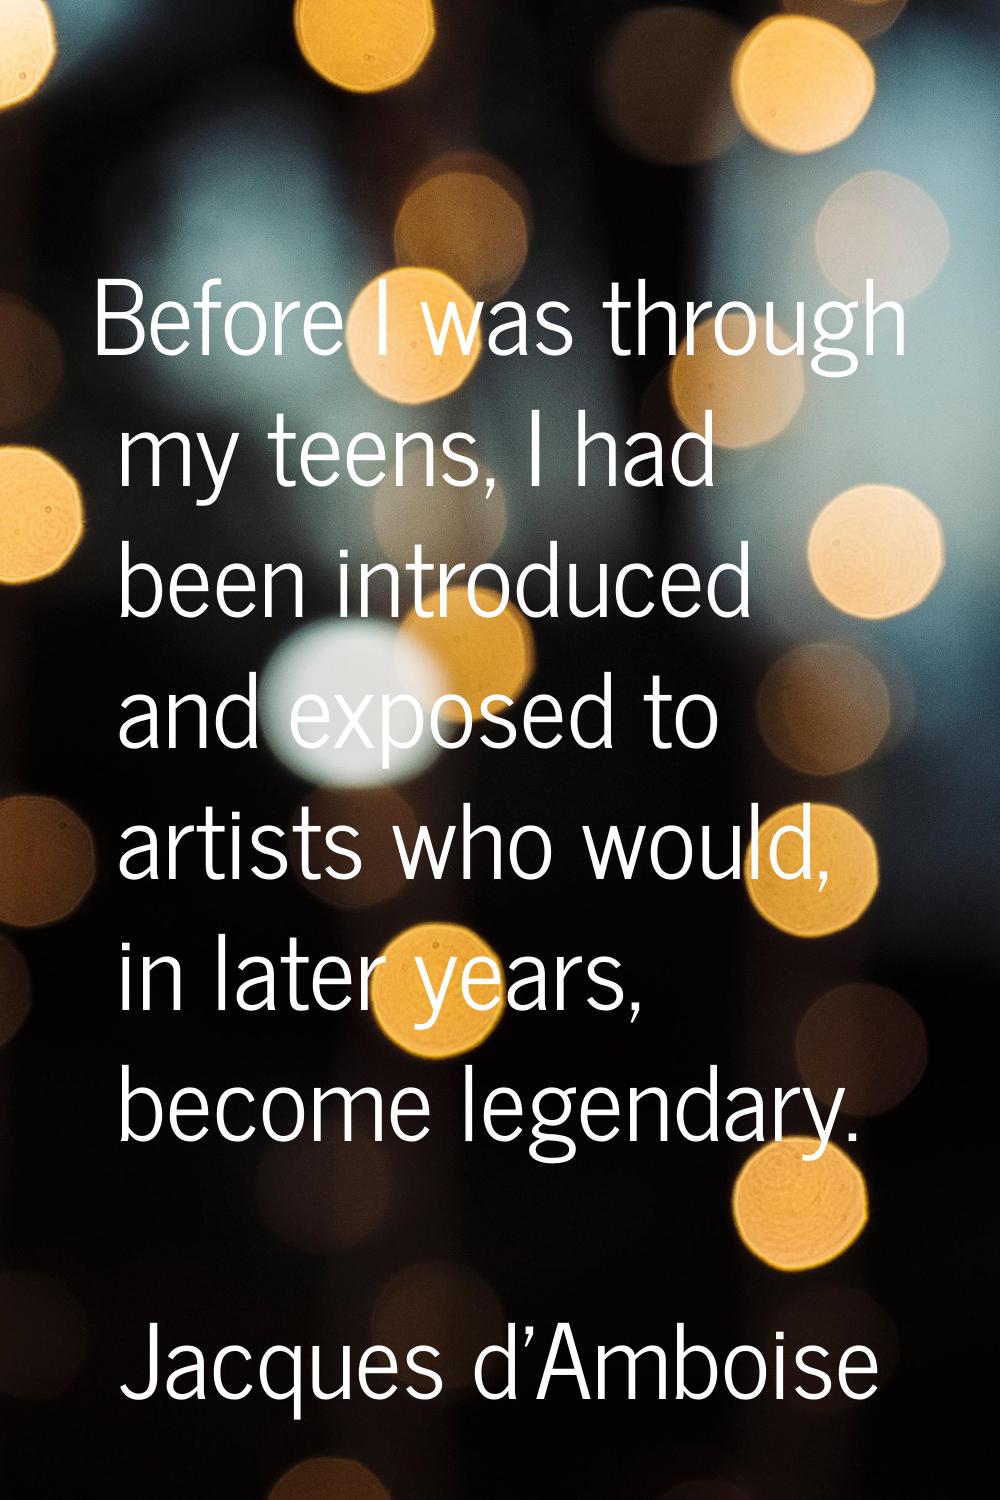 Before I was through my teens, I had been introduced and exposed to artists who would, in later yea